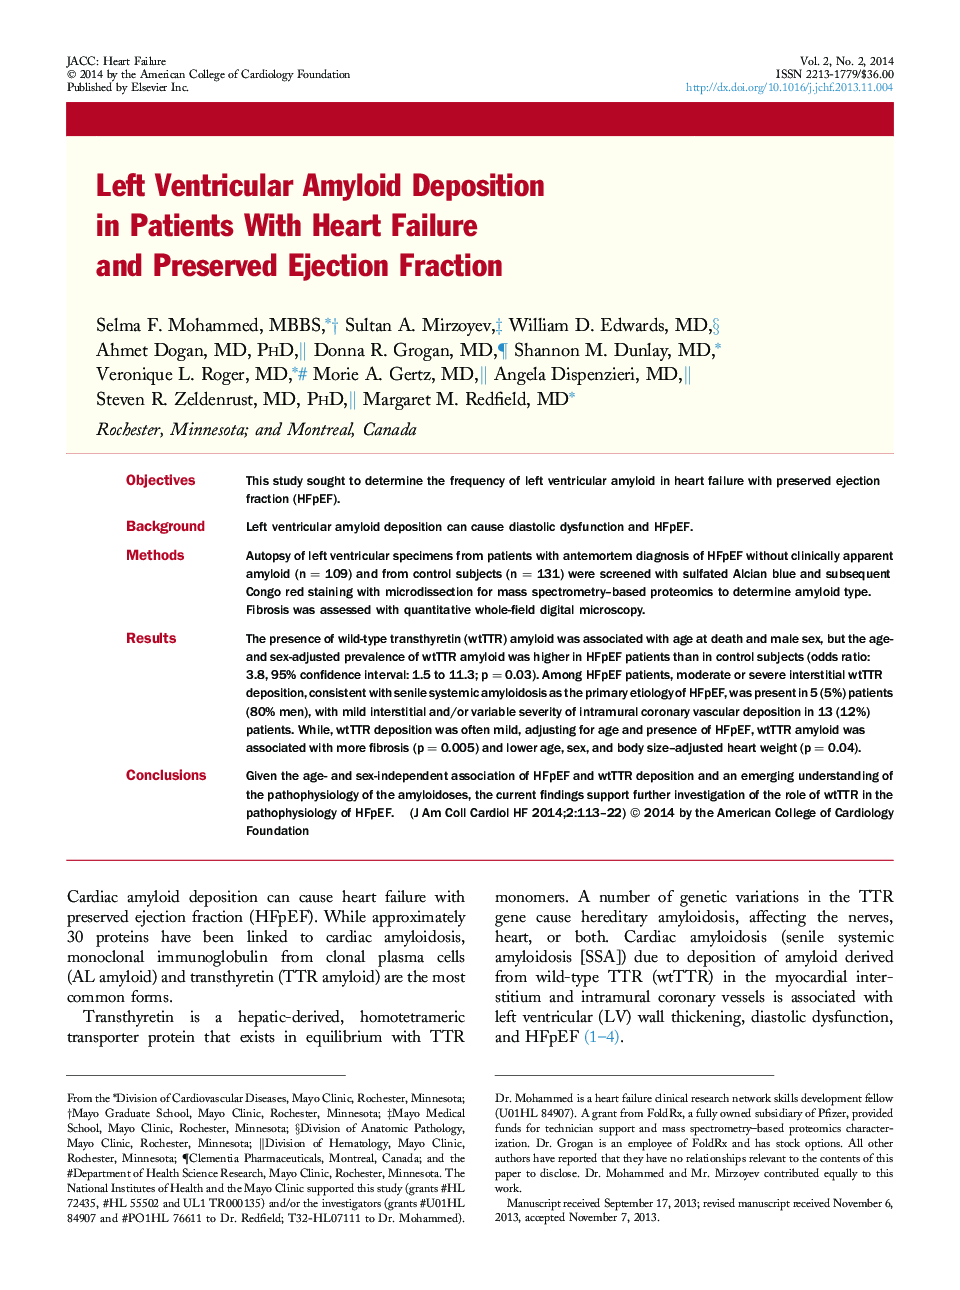 Left Ventricular Amyloid Deposition in Patients With Heart Failure and Preserved Ejection Fraction 